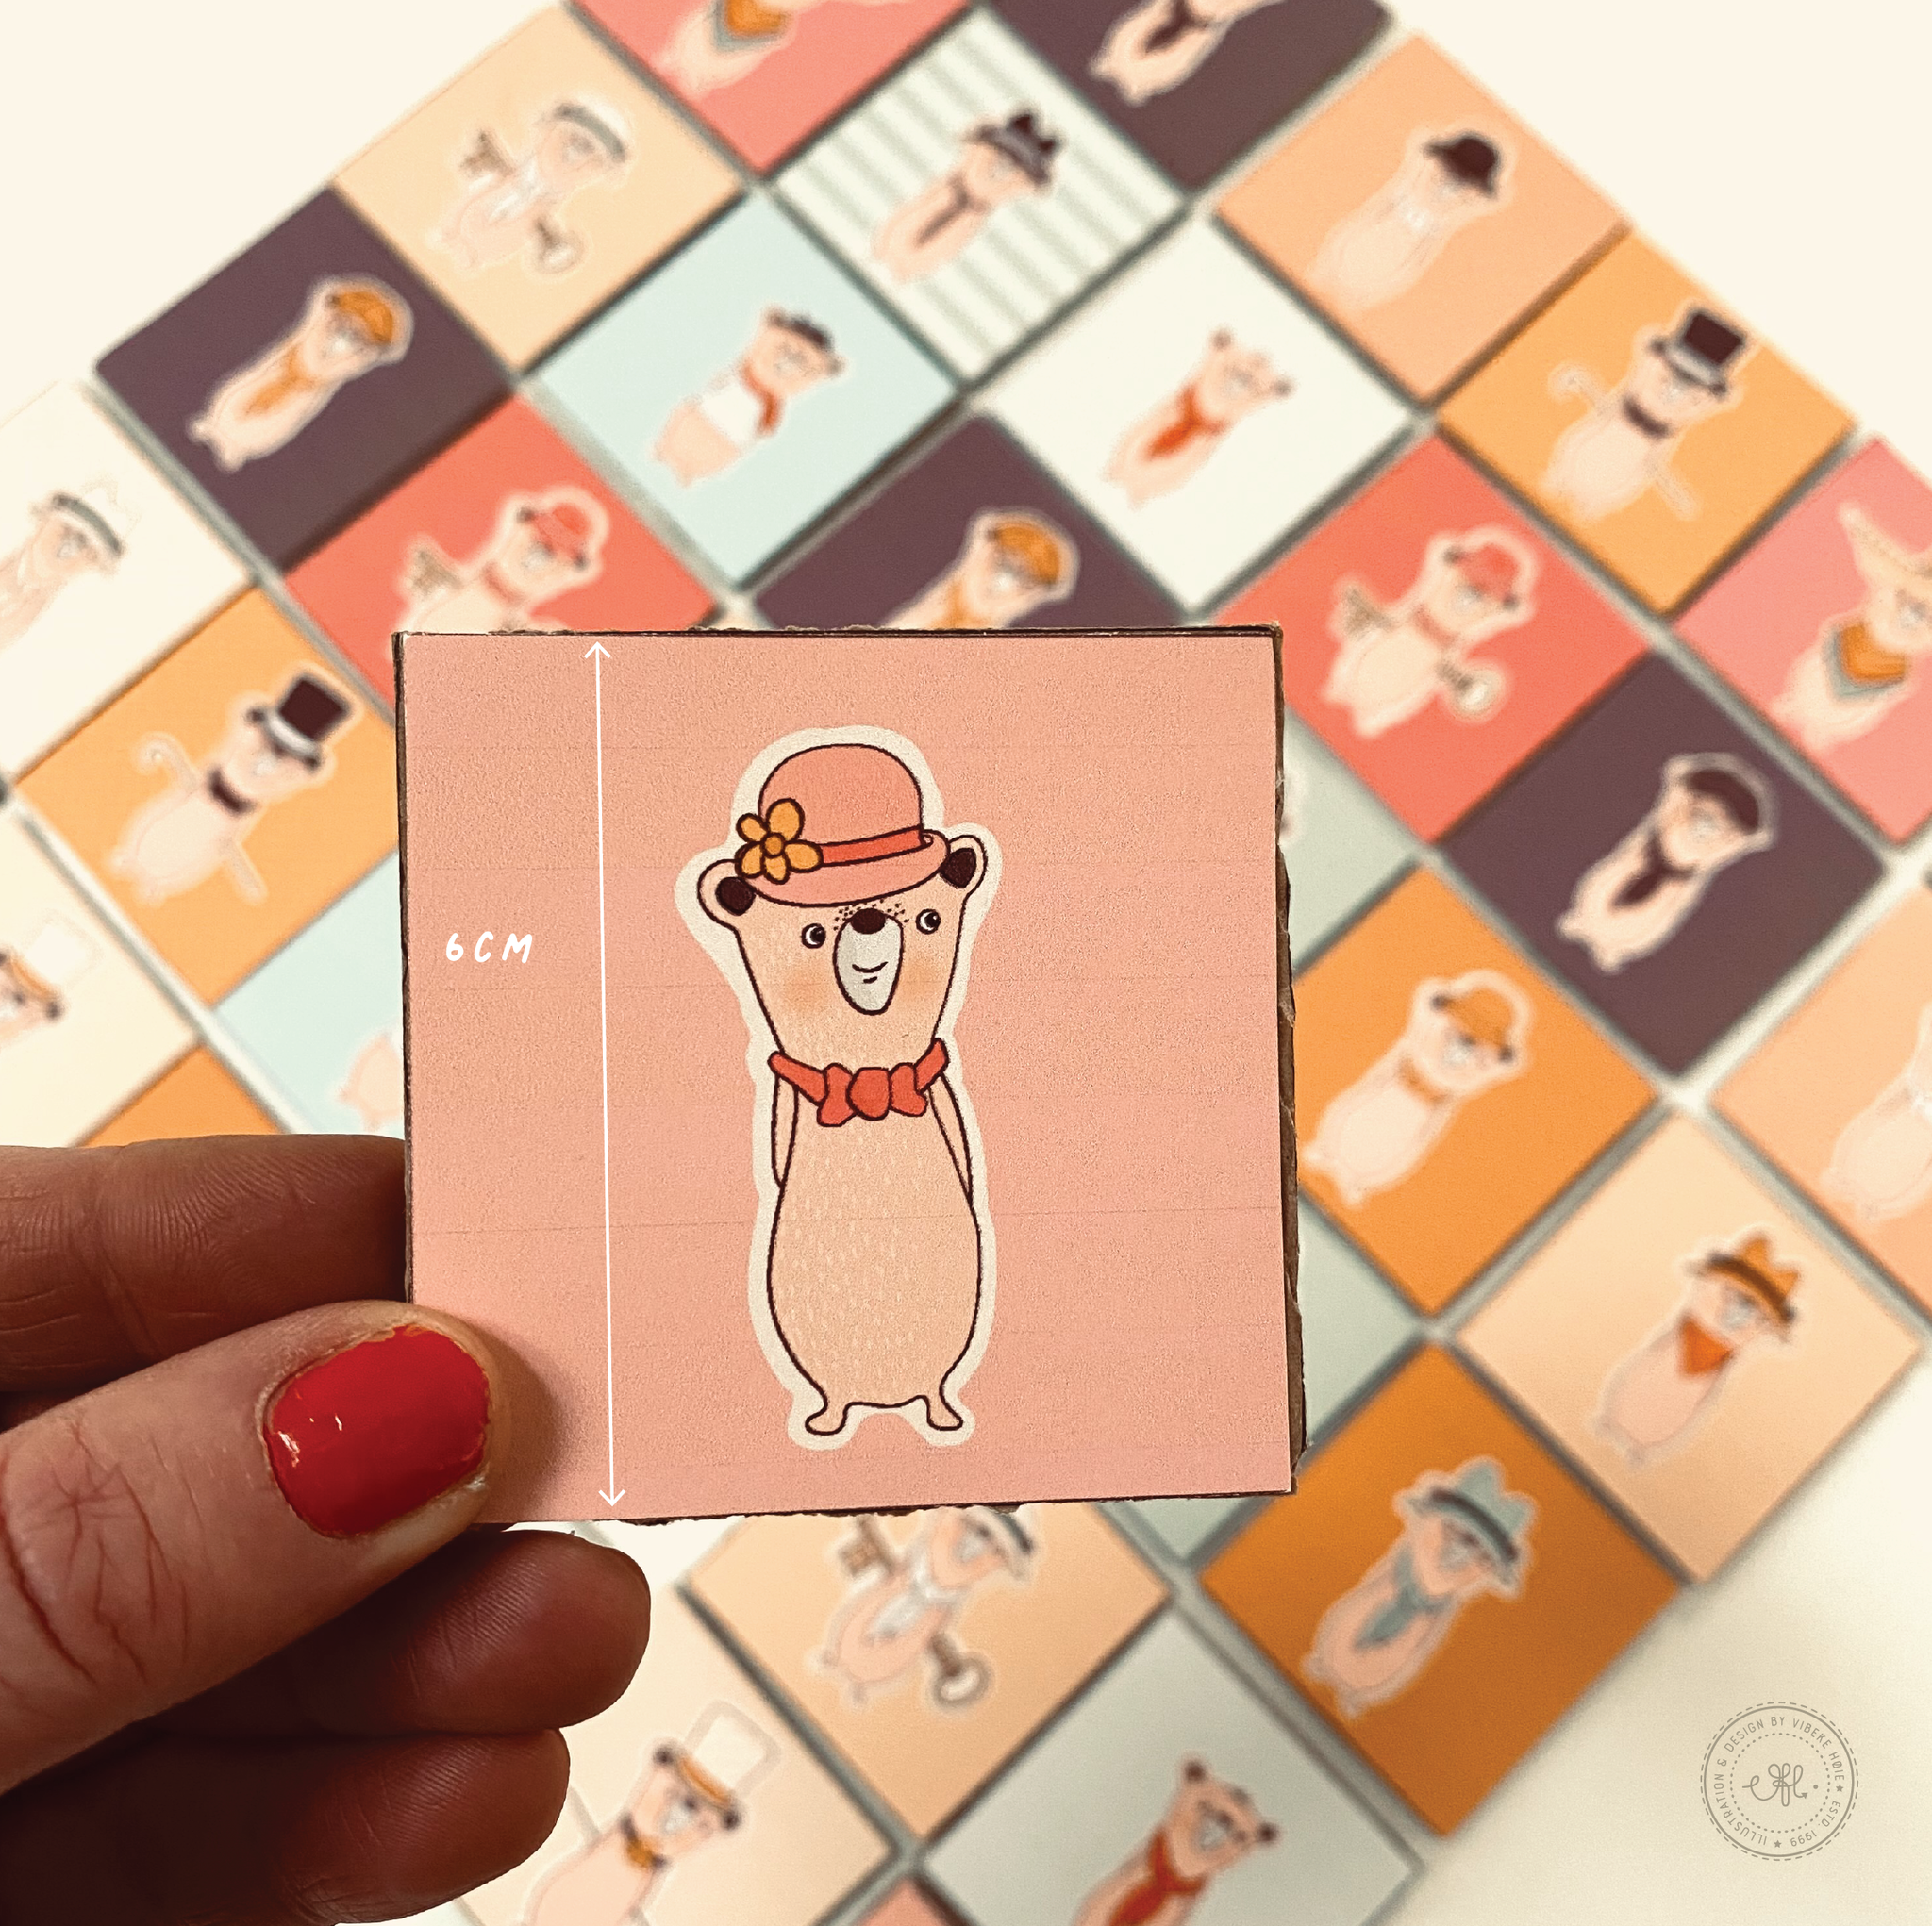 Mr. Buttercup's Memory Game in paper